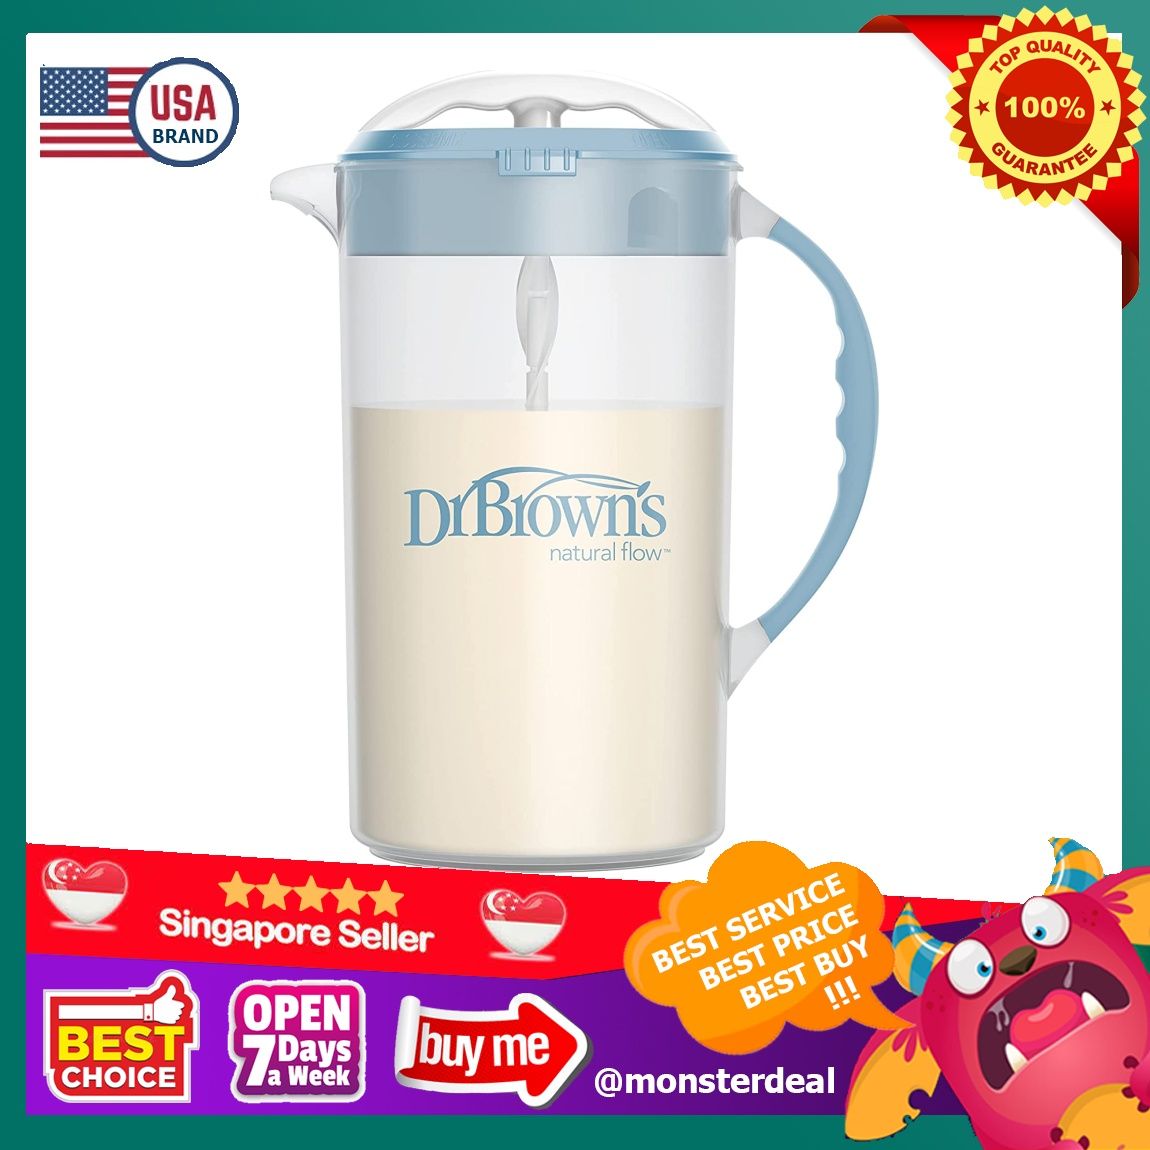 Dr. Brown's Baby Formula Mixing Pitcher with Adjustable Stopper, Locking  Lid, & No Drip Spout, 32oz, BPA Free, Olive 